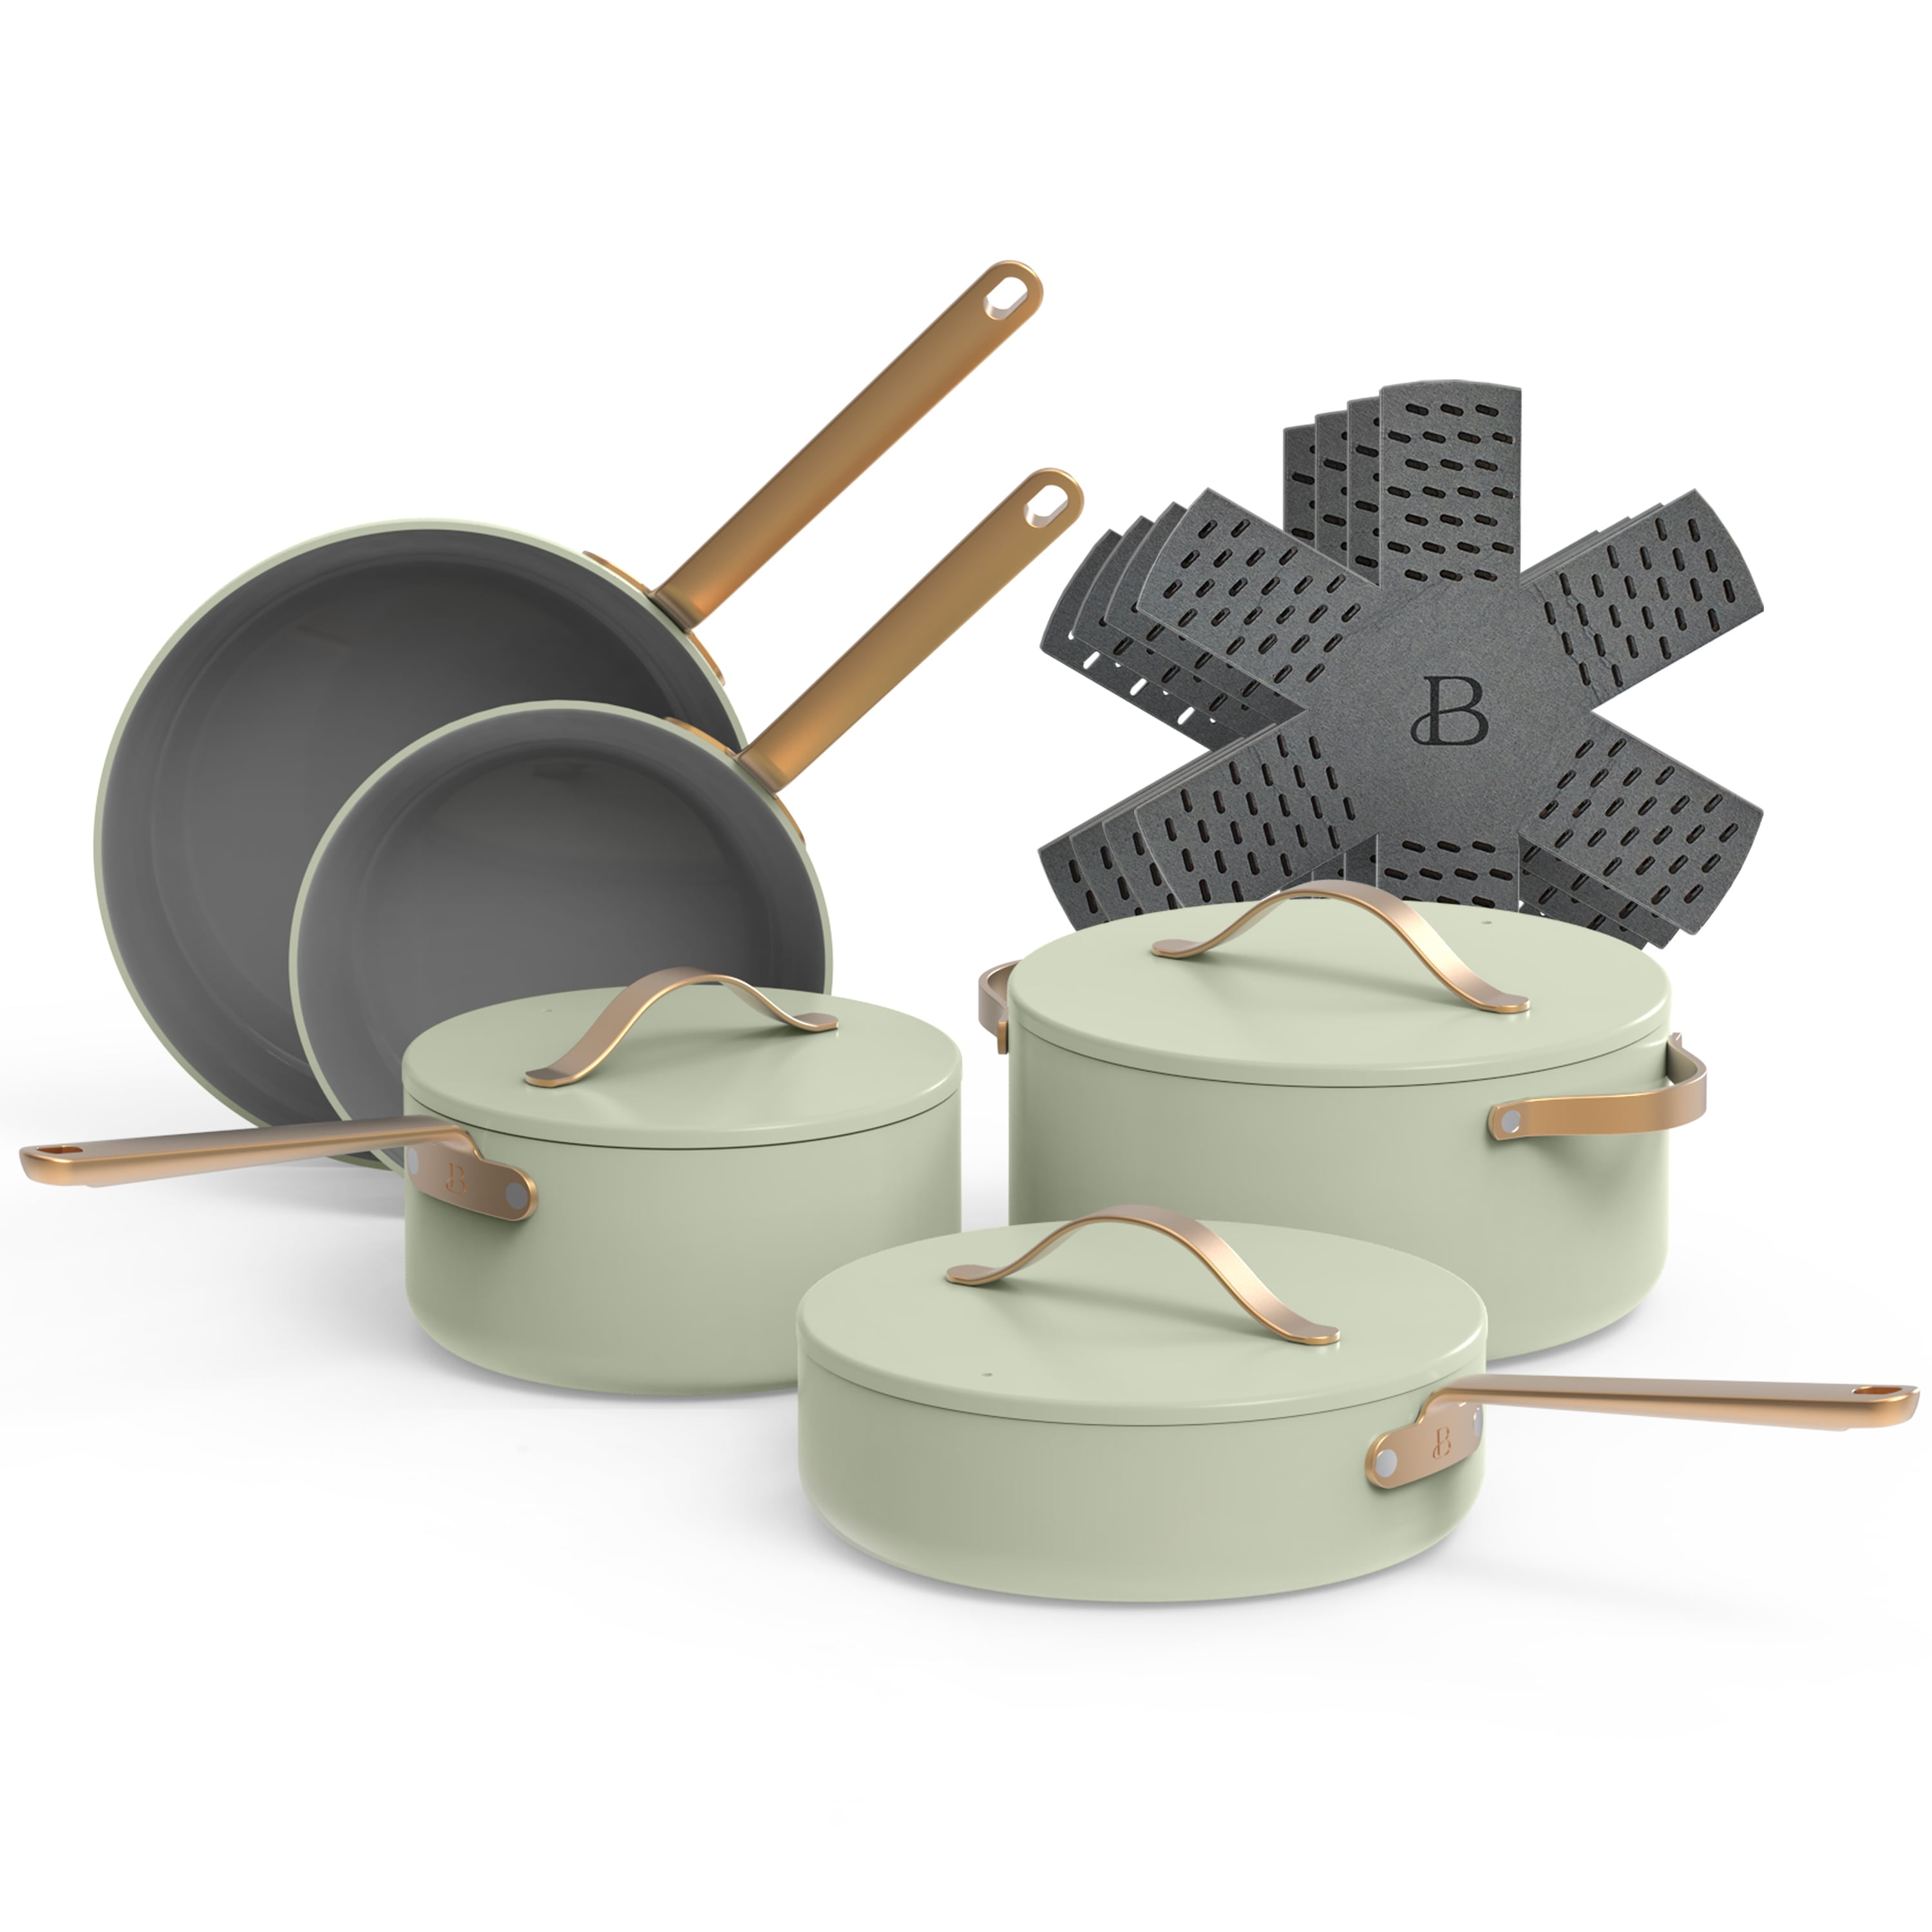 Beautiful 12pc Ceramic Non-Stick Cookware Set, Sage Green by Drew Barrymore  